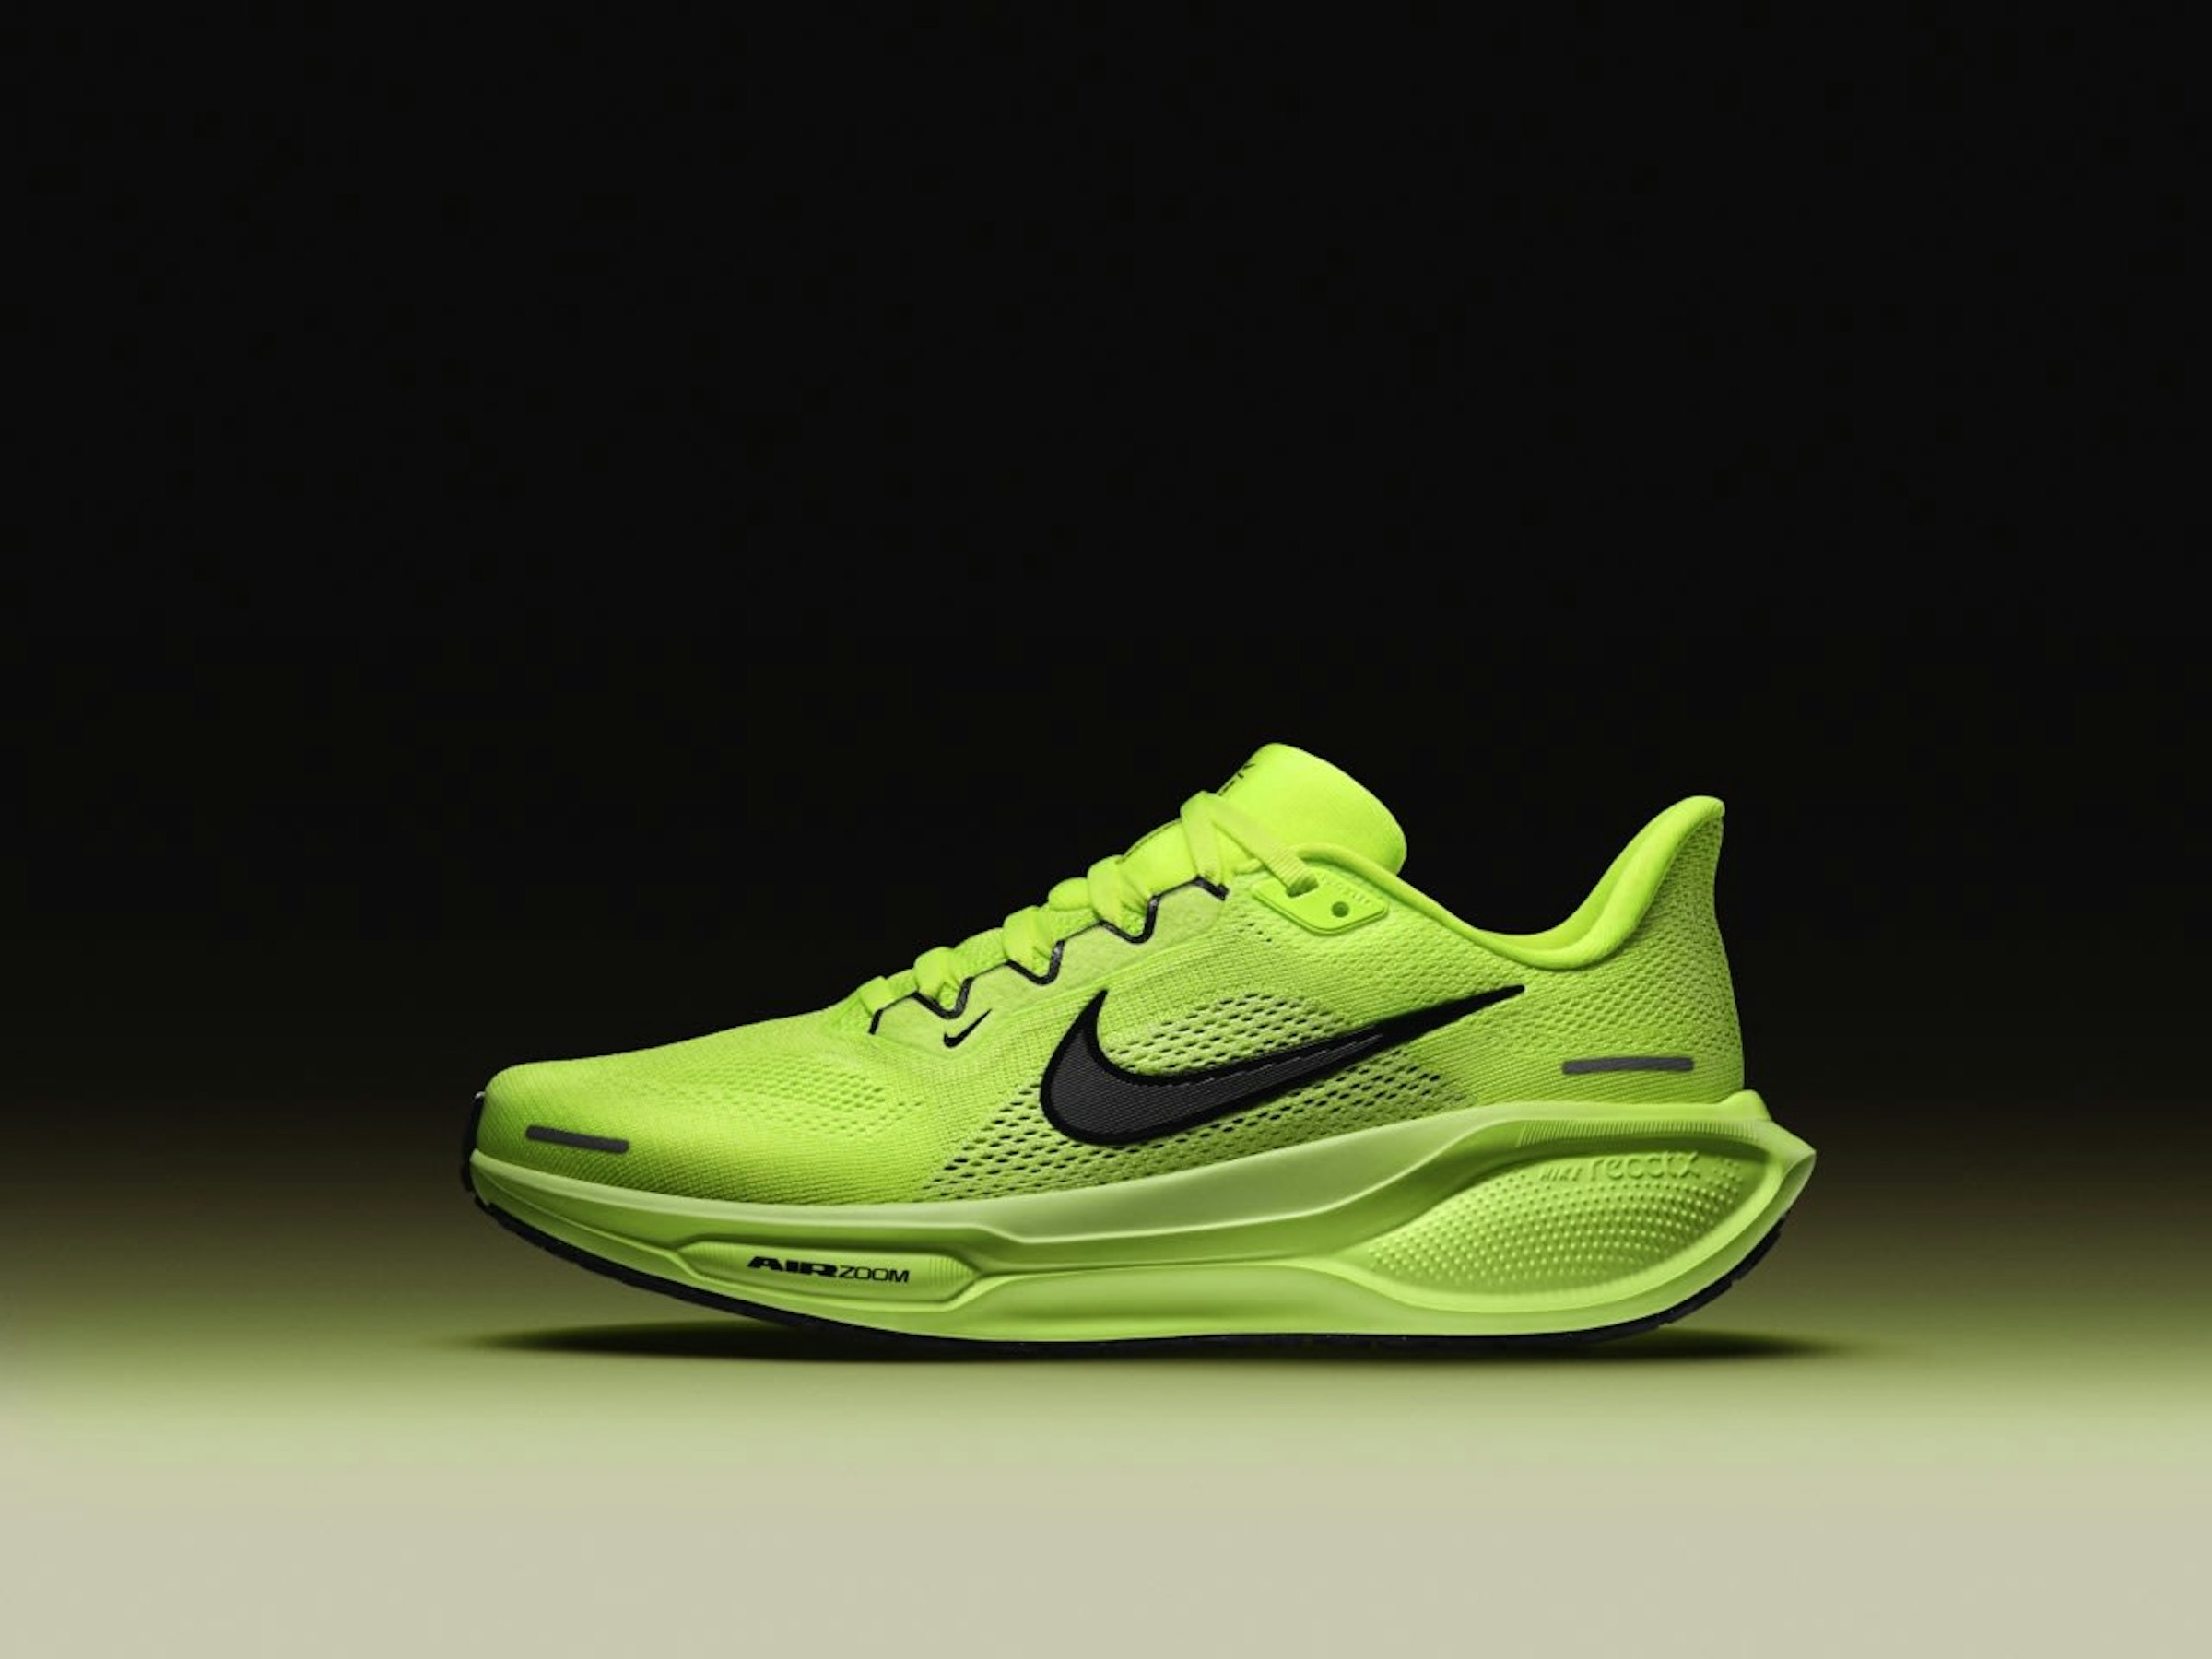 The Volt colorway is scheduled for early June release at NIKE.COM and select retailers